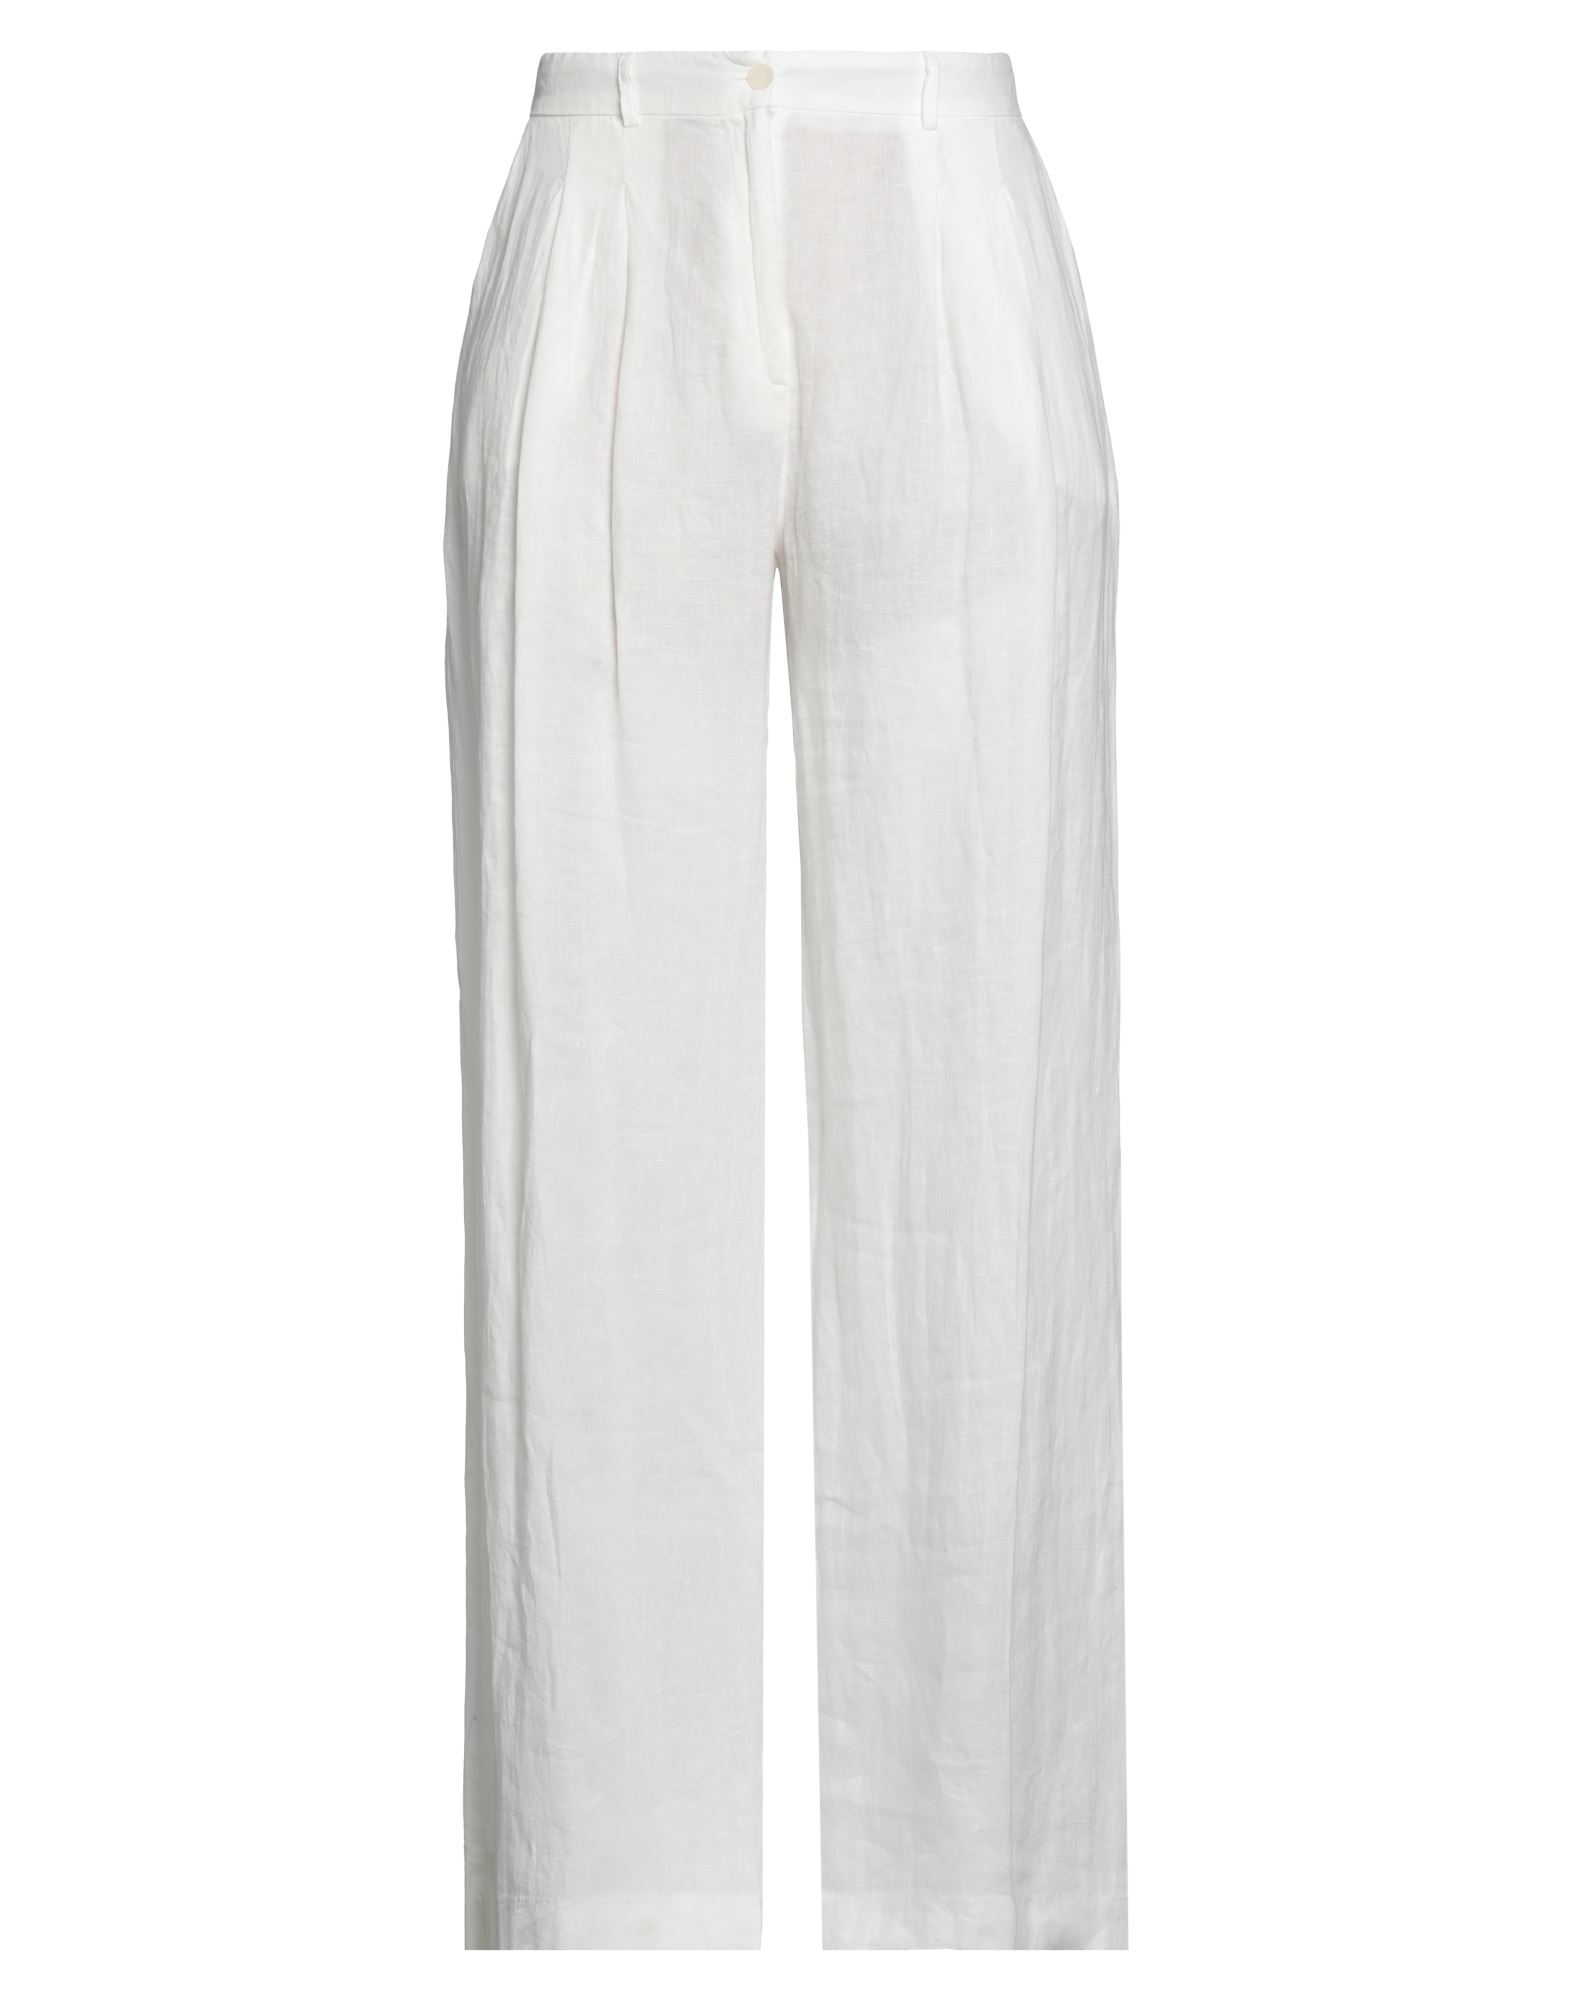 Access Fashion Pants In Off White